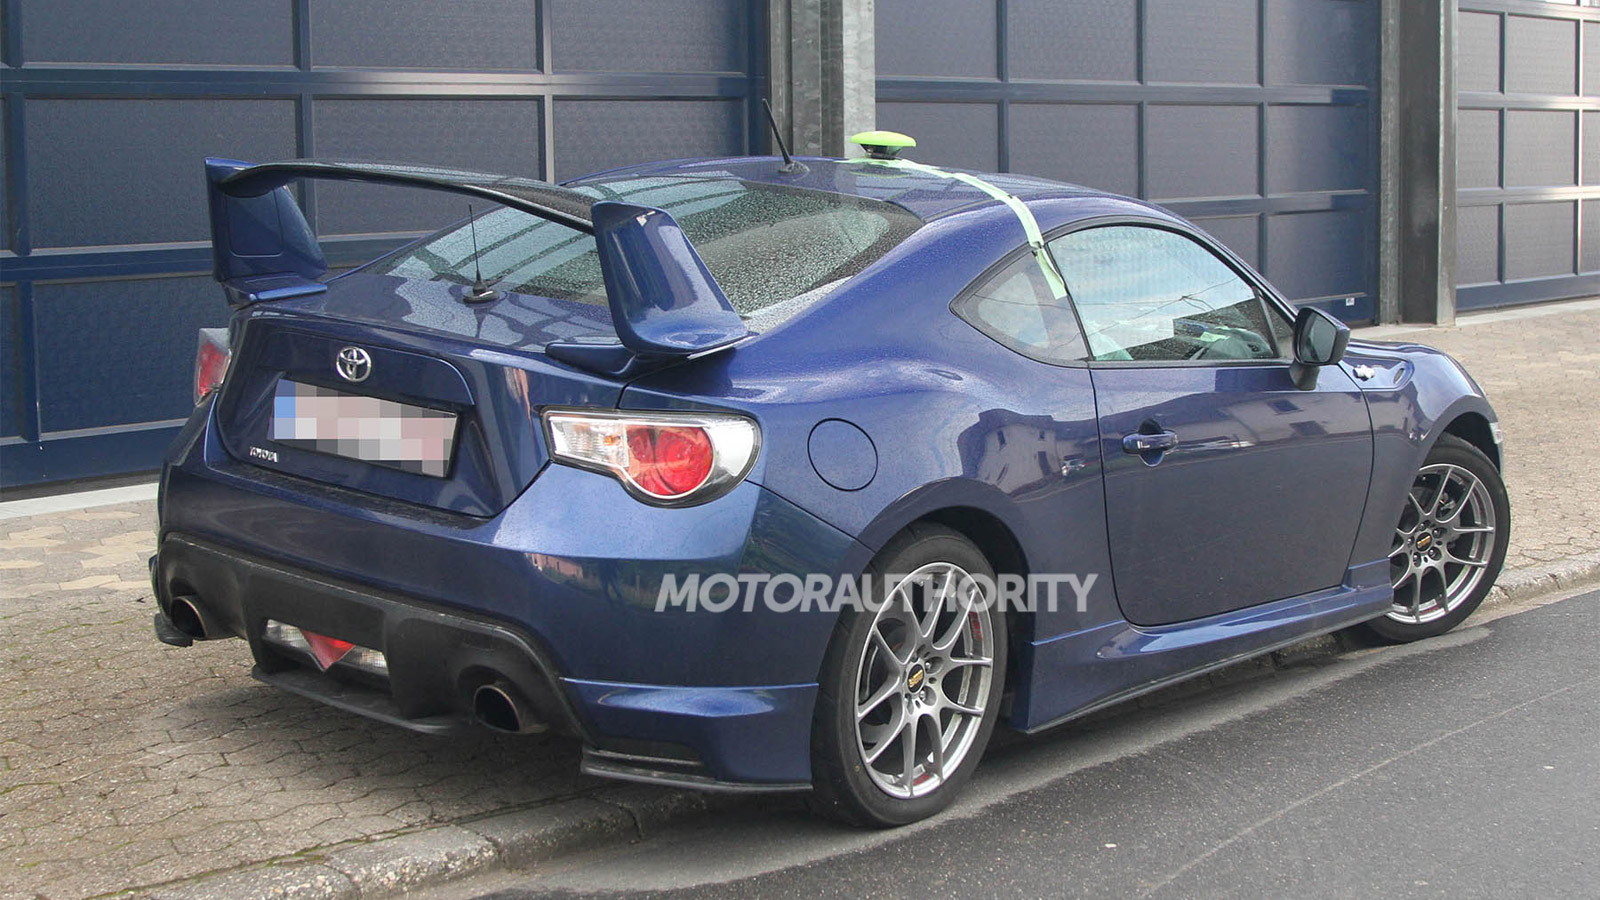 Toyota GT 86 with factory aero kit testing in Europe